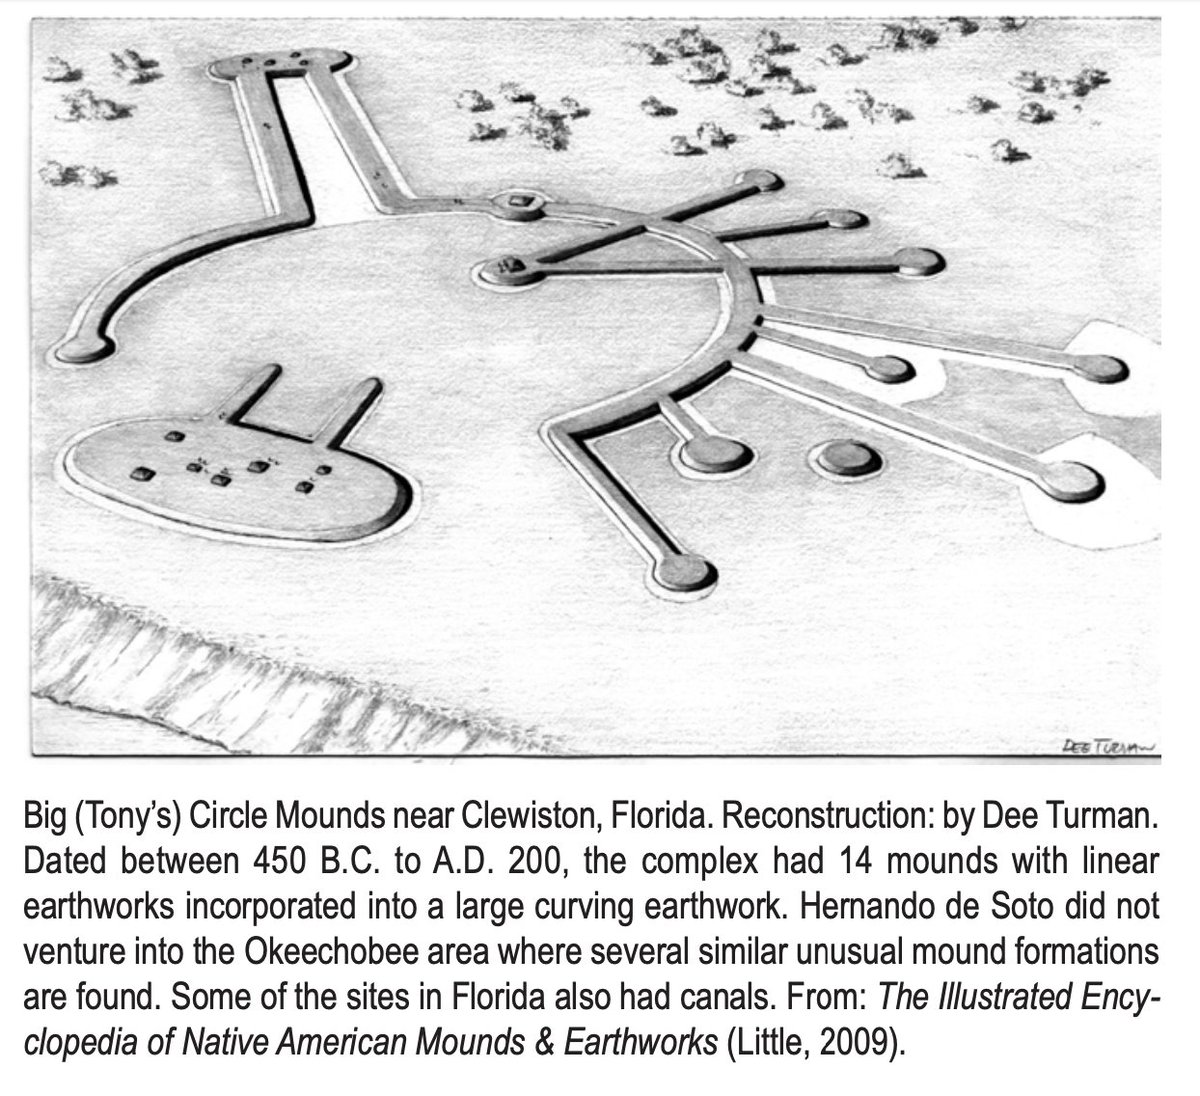 One of my favorite archaeological site reconstructions from the mound encyclopedia. This is Big (Tony's) Circle Mounds in Florida. It was a somewhat bizarre configuration of elevated earthworks (causeways) connecting mounds. It was found and investigated by archaeologists in